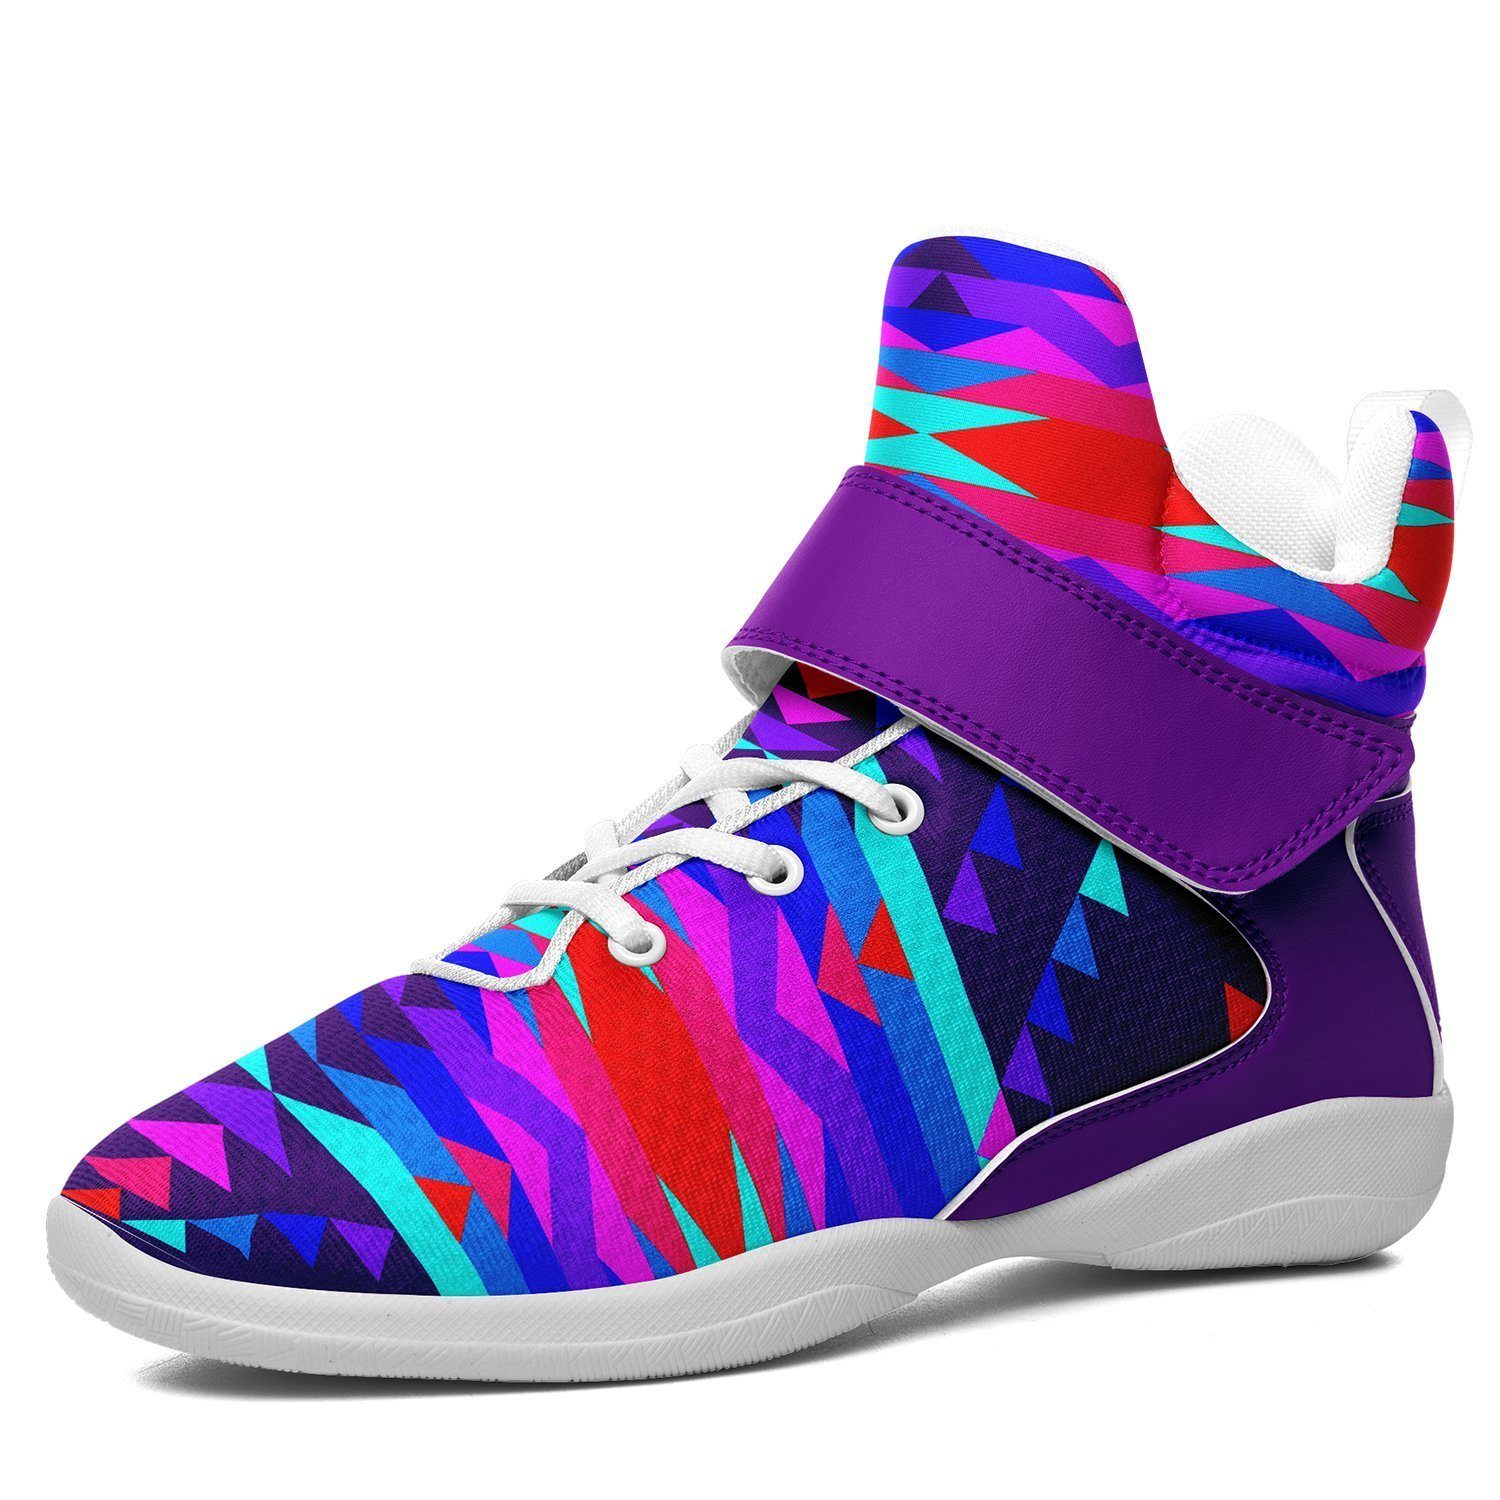 Visions of Peace Ipottaa Basketball / Sport High Top Shoes - White Sole 49 Dzine US Men 7 / EUR 40 White Sole with Indigo Strap 